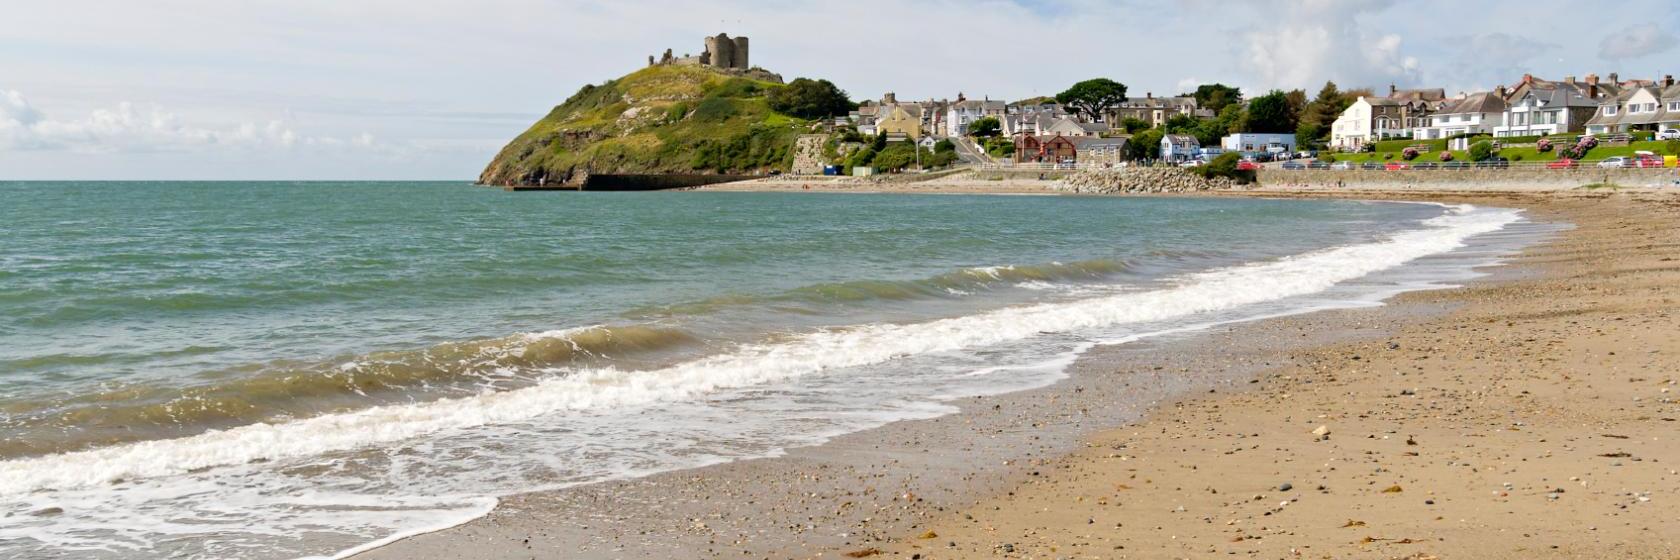 10 Best Criccieth Hotels, United Kingdom (From $76)